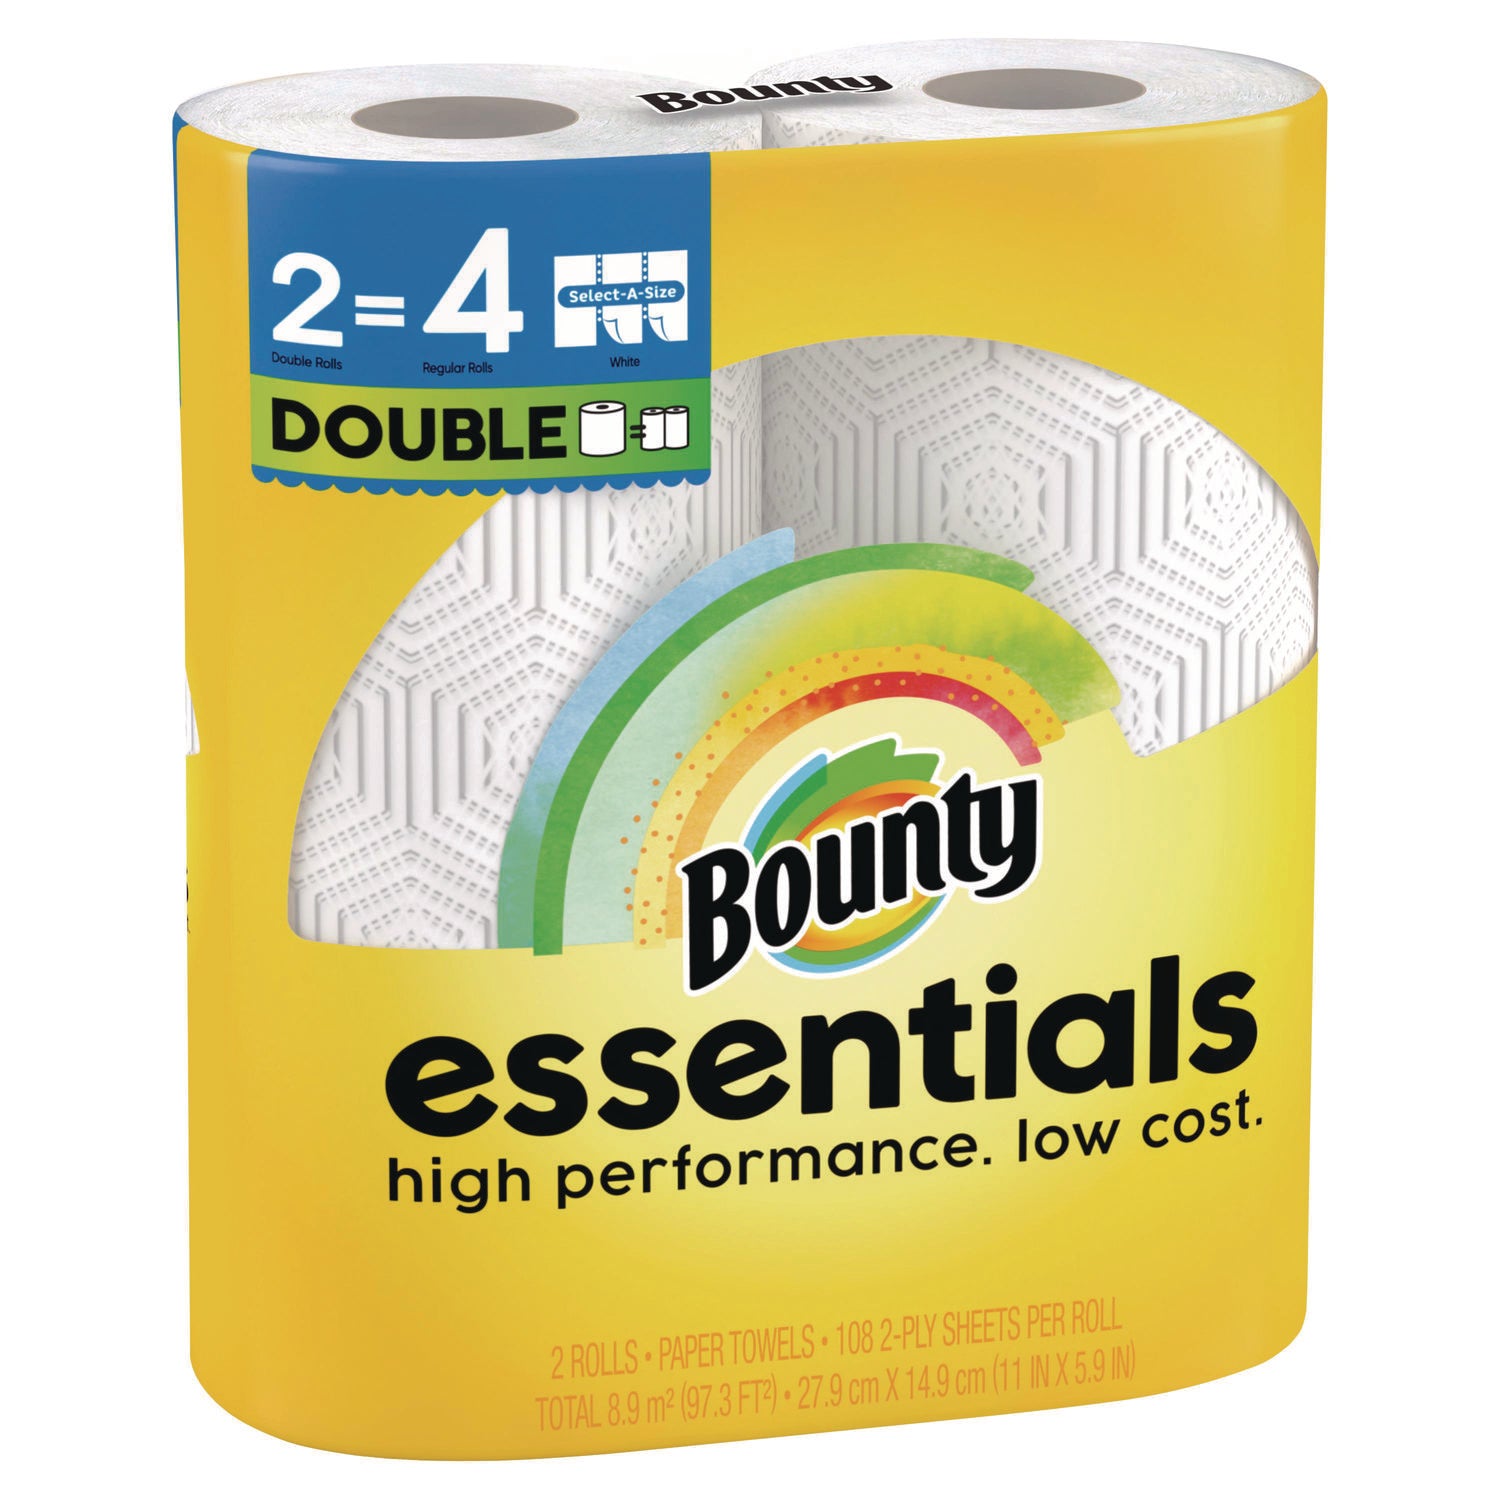 essentials-select-a-size-kitchen-roll-paper-towels-2-ply-white-108-sheets-roll-2-pack-8-packs-carton_pgc14019 - 3